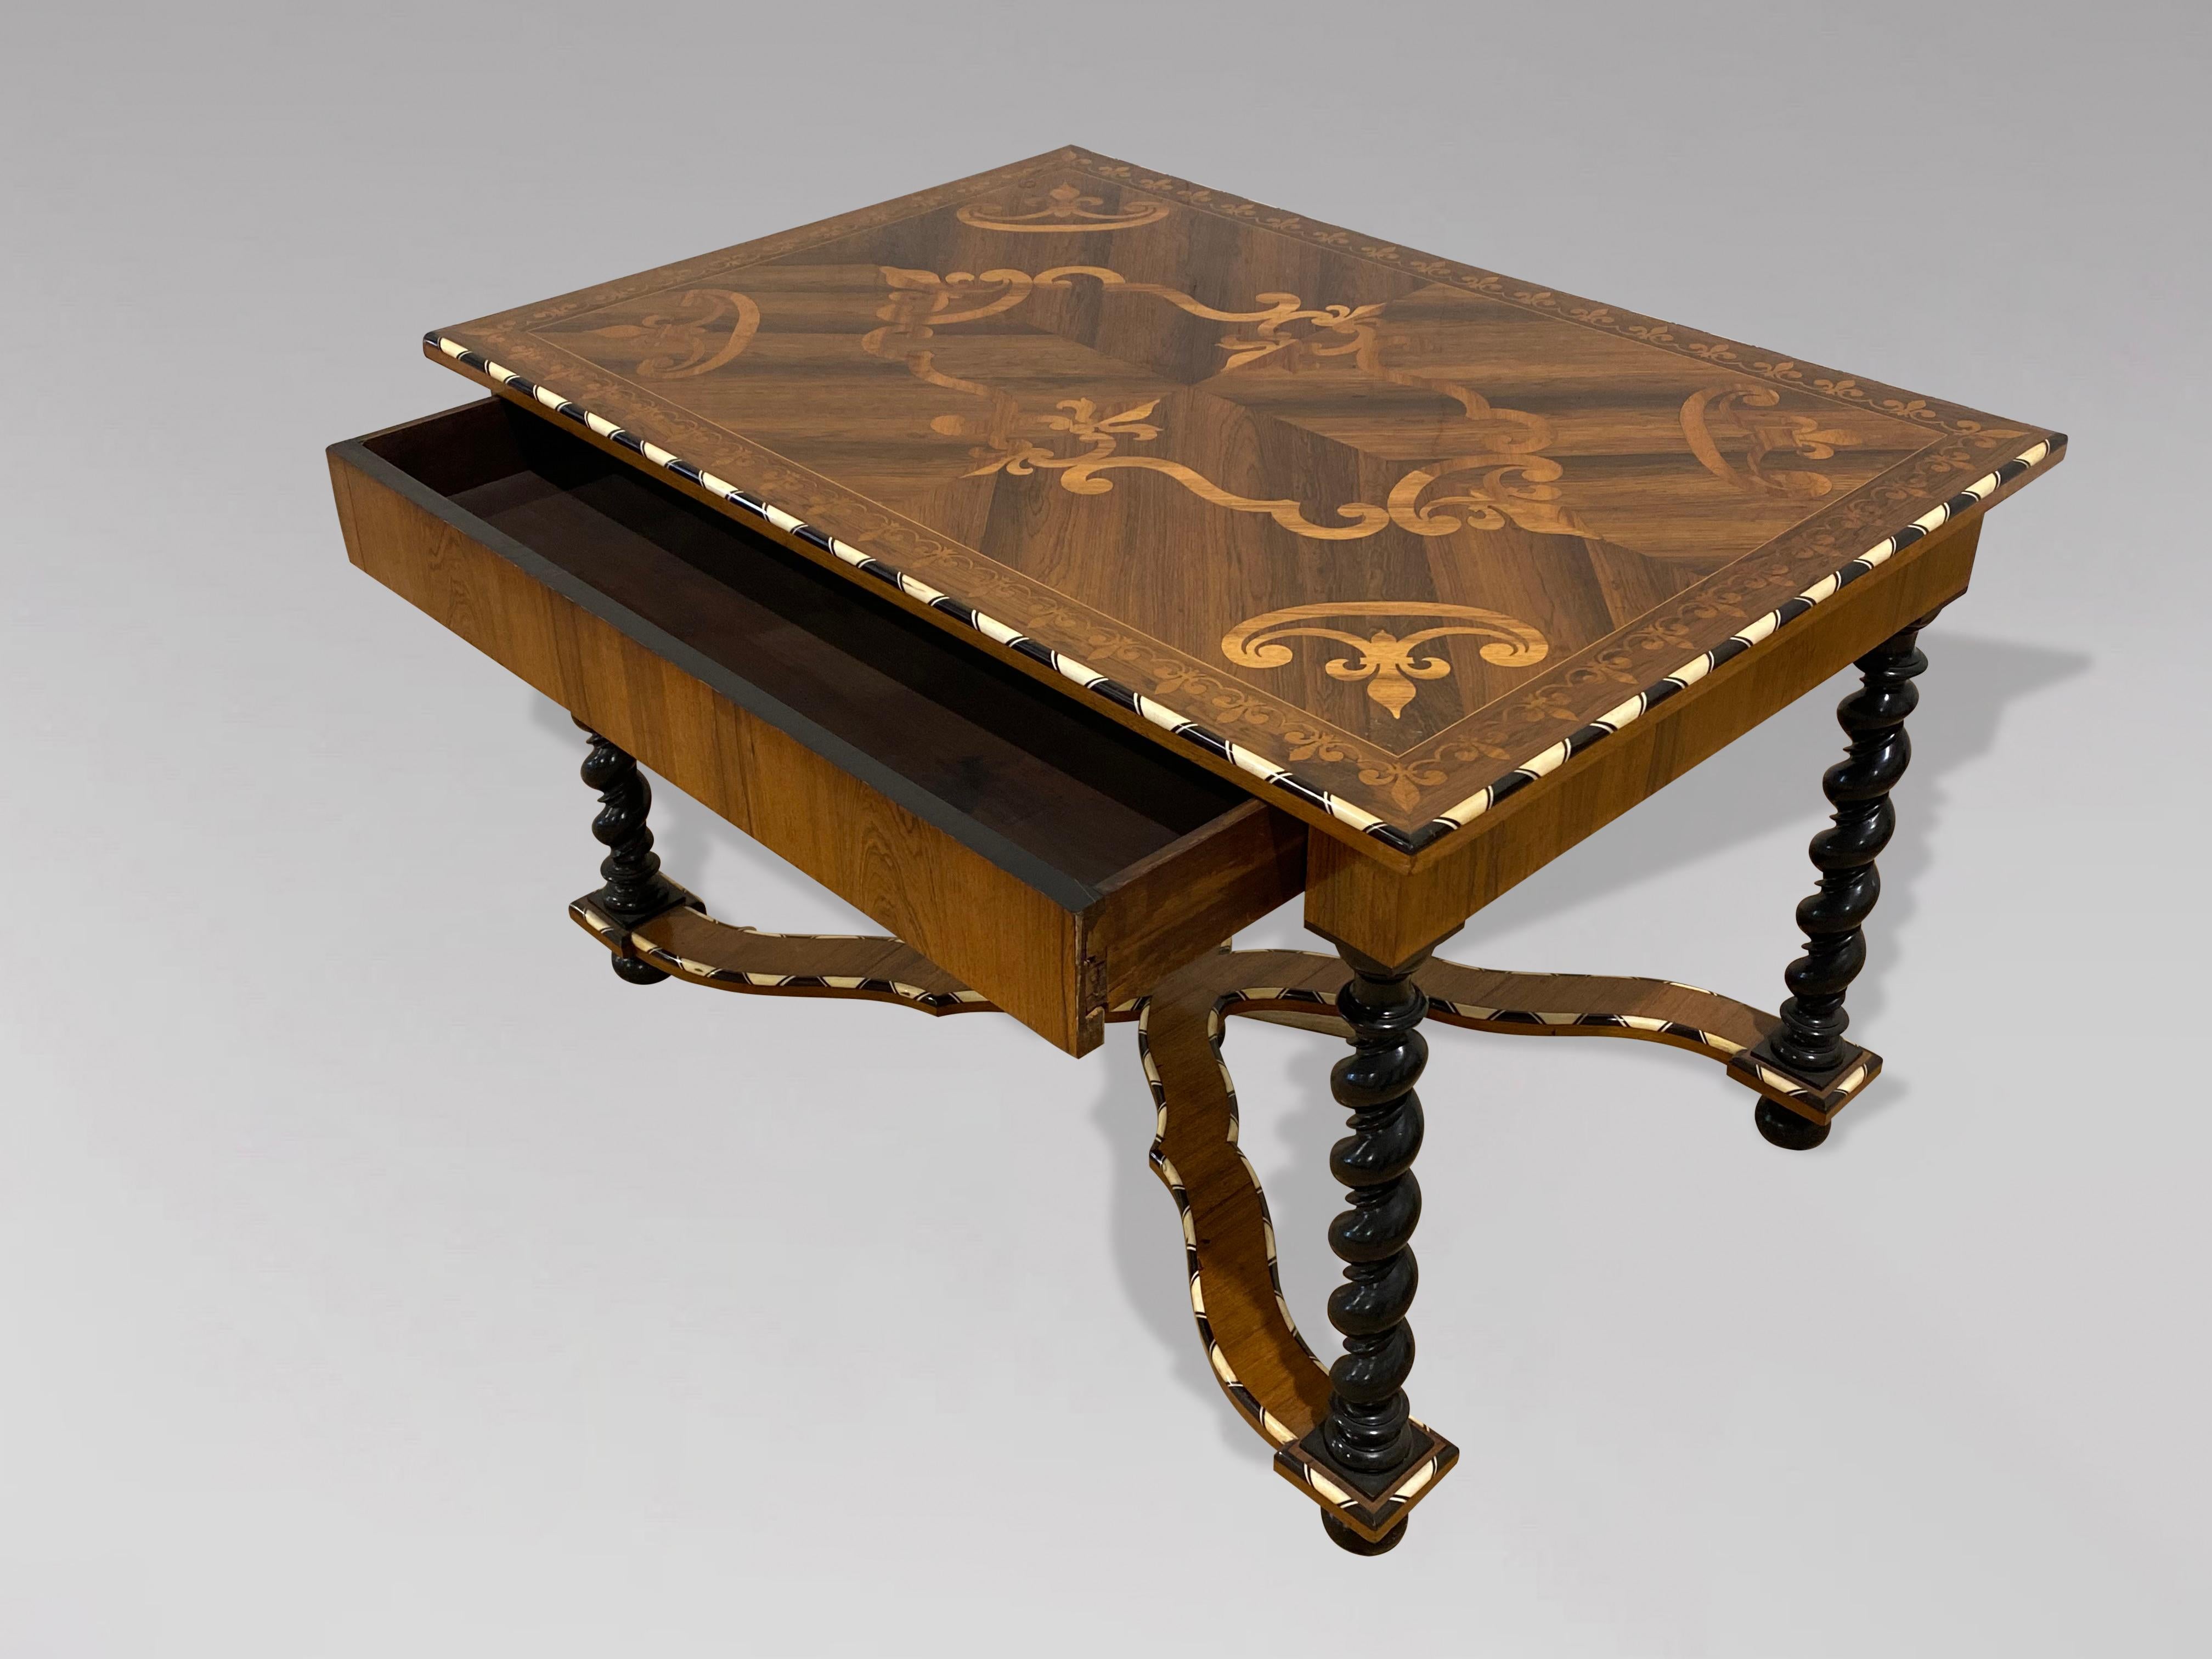 Stunning Dutch Rosewood Marquetry Centre Table In Good Condition For Sale In Petworth,West Sussex, GB